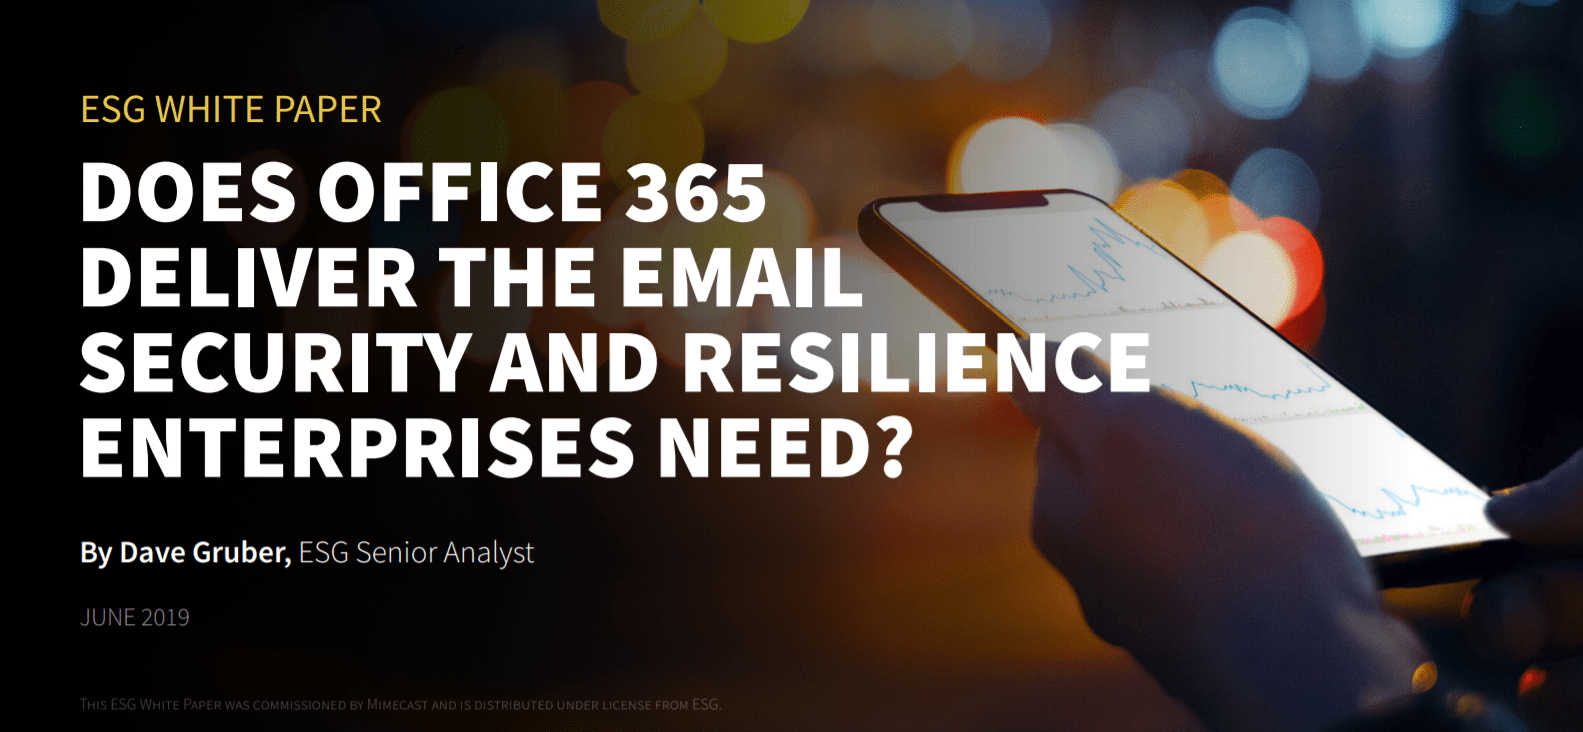 3 1 - Does Office 365 Deliver the Email Security and Resilience Enterprises Need